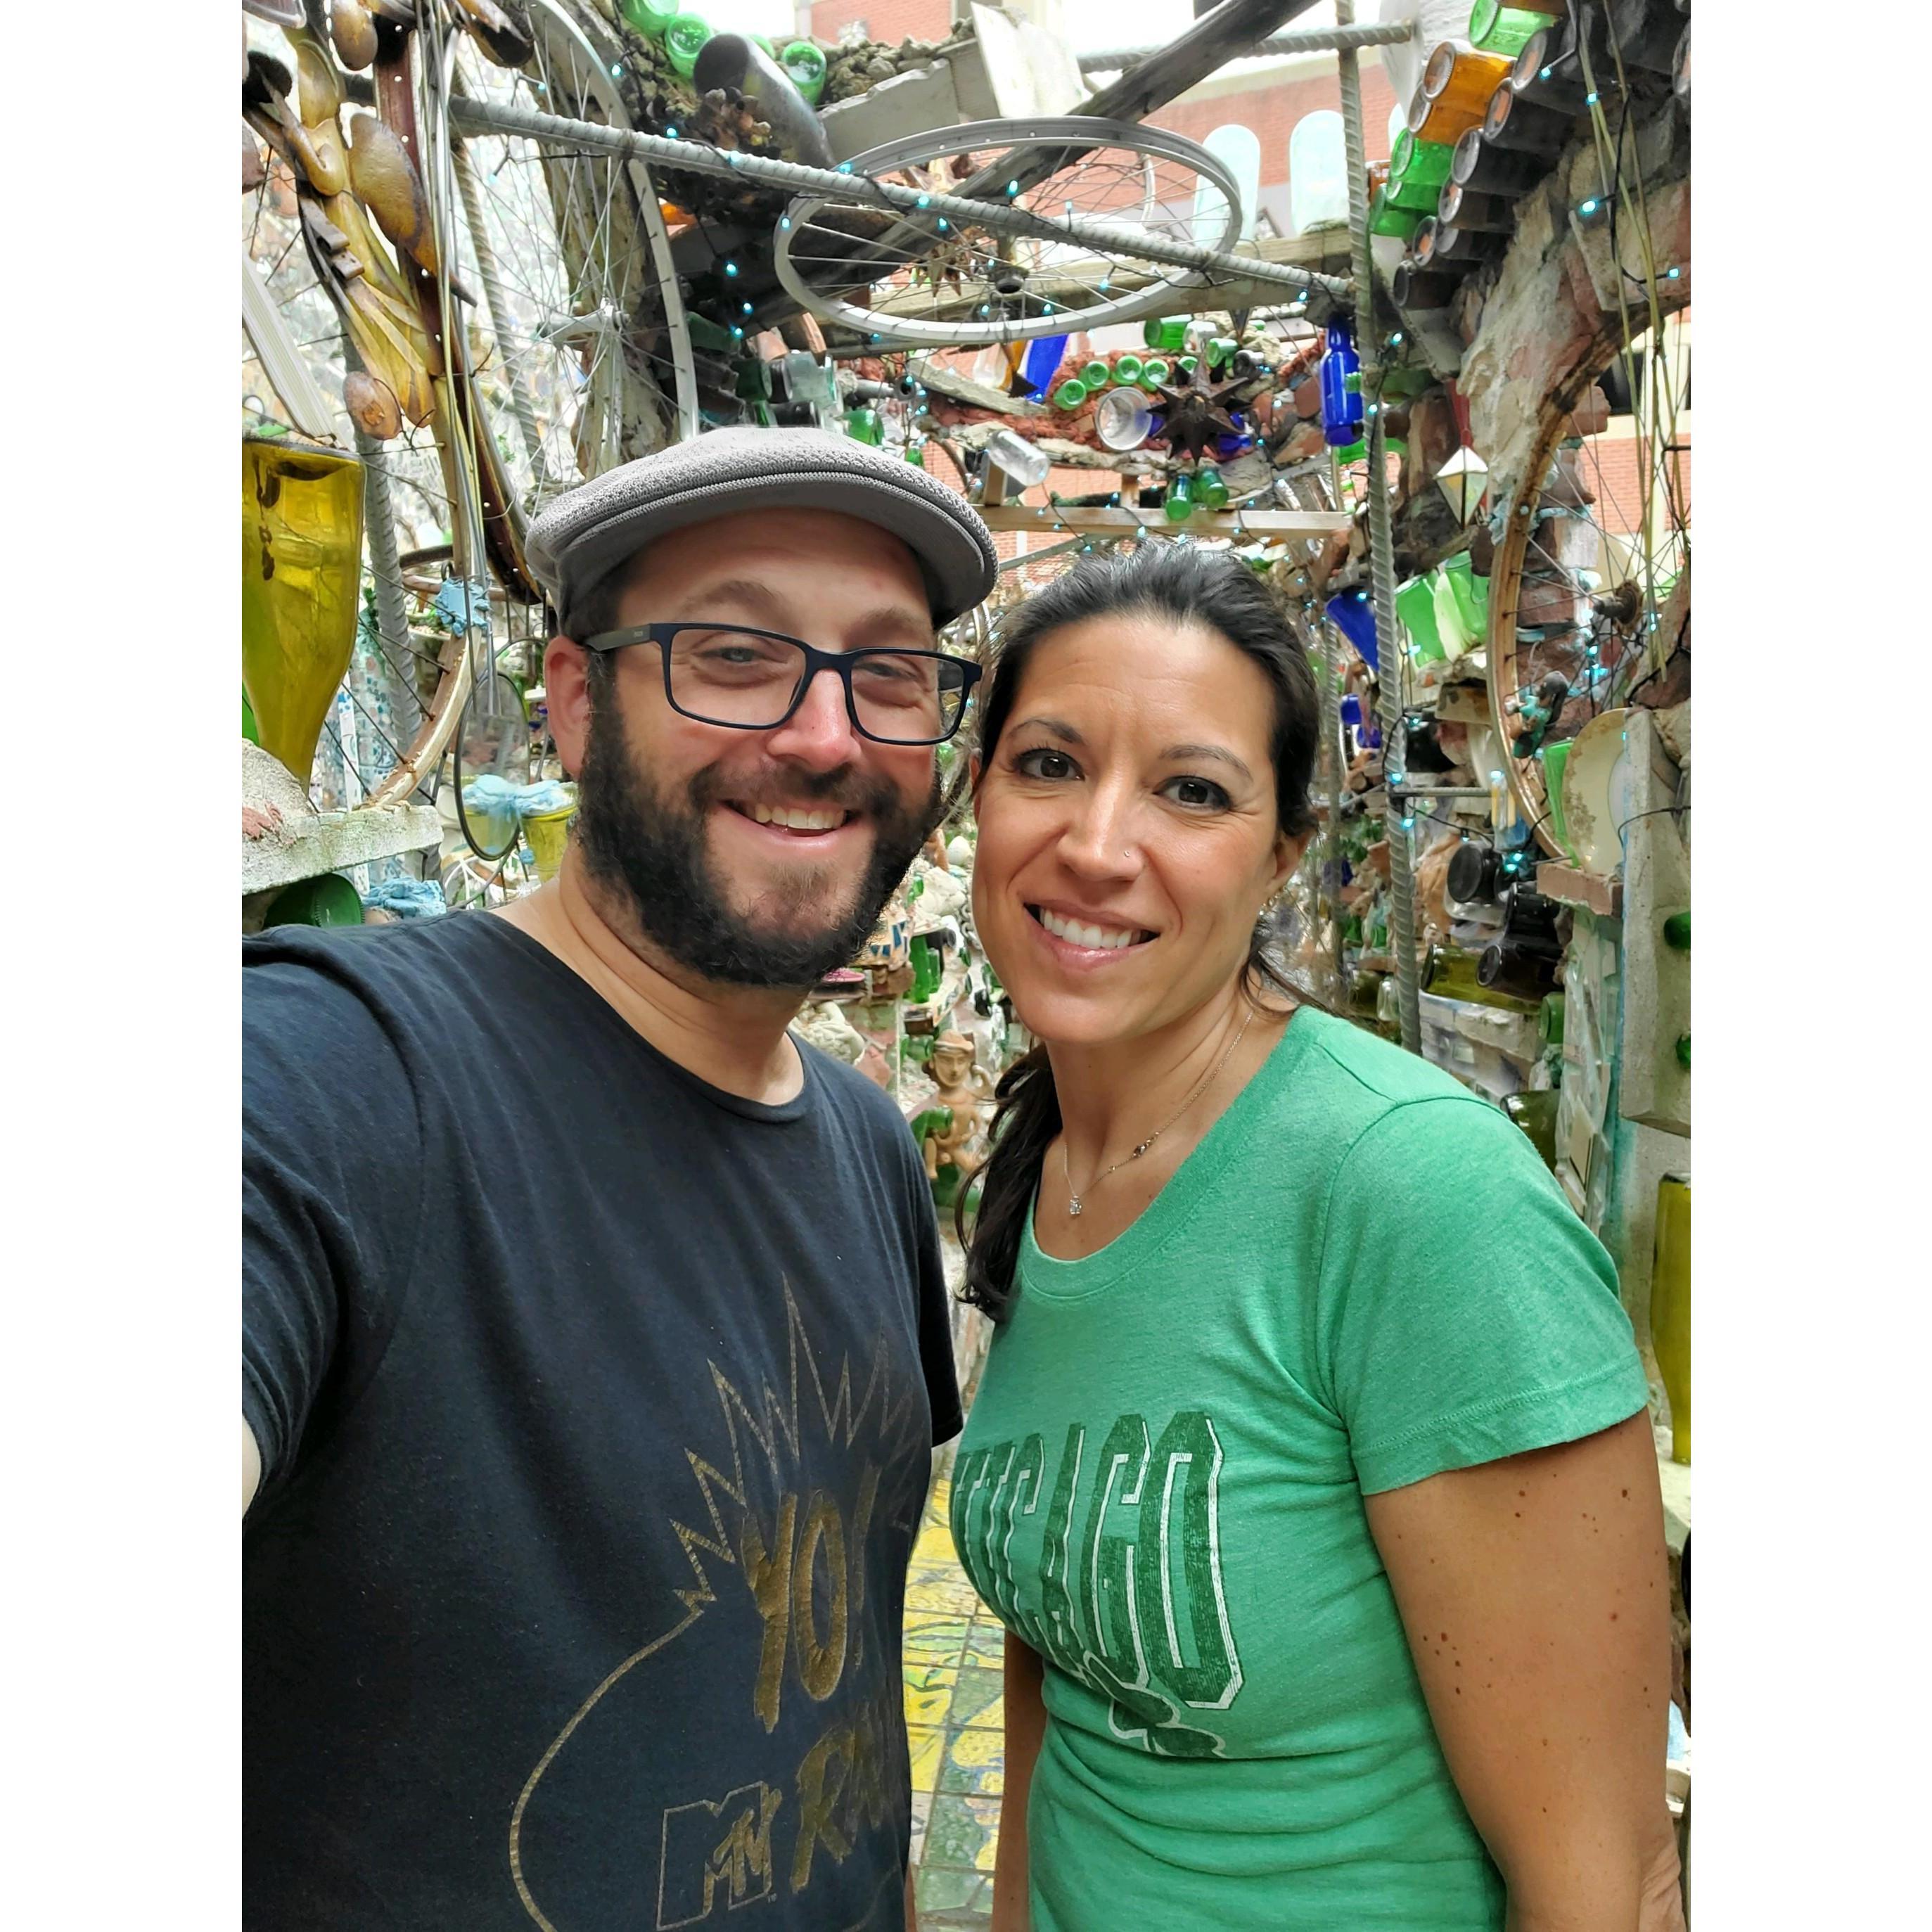 Getting lost in the magic gardens.